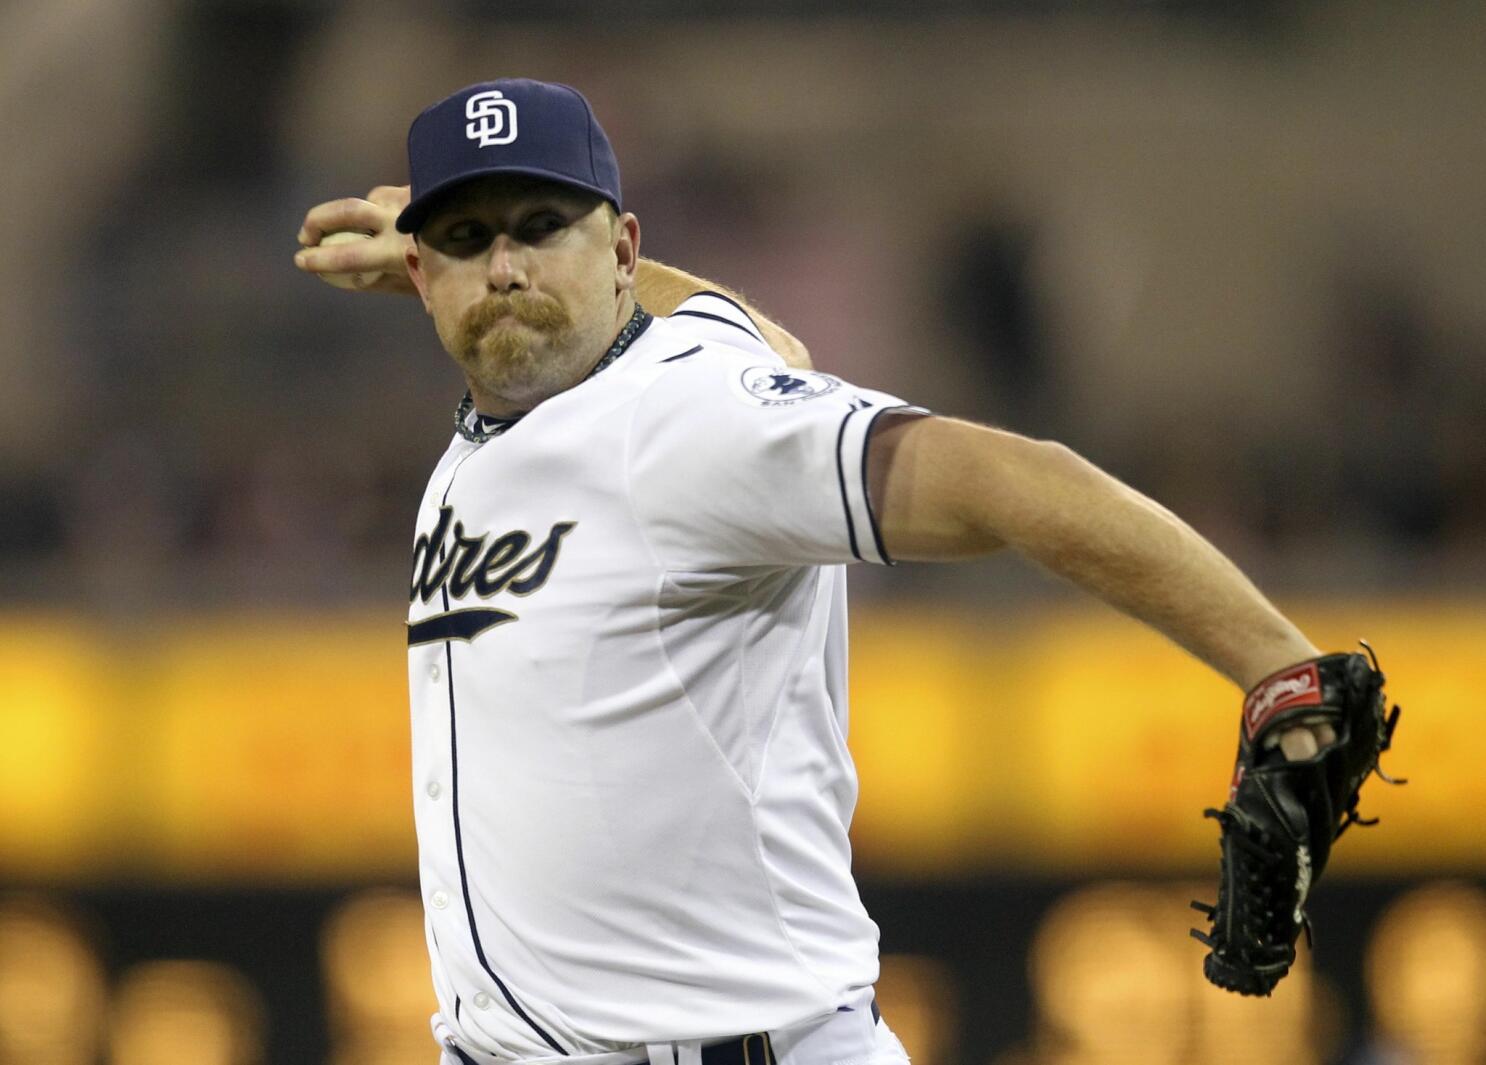 Trevor Hoffman eager to 'take it all in' during Tucson return for